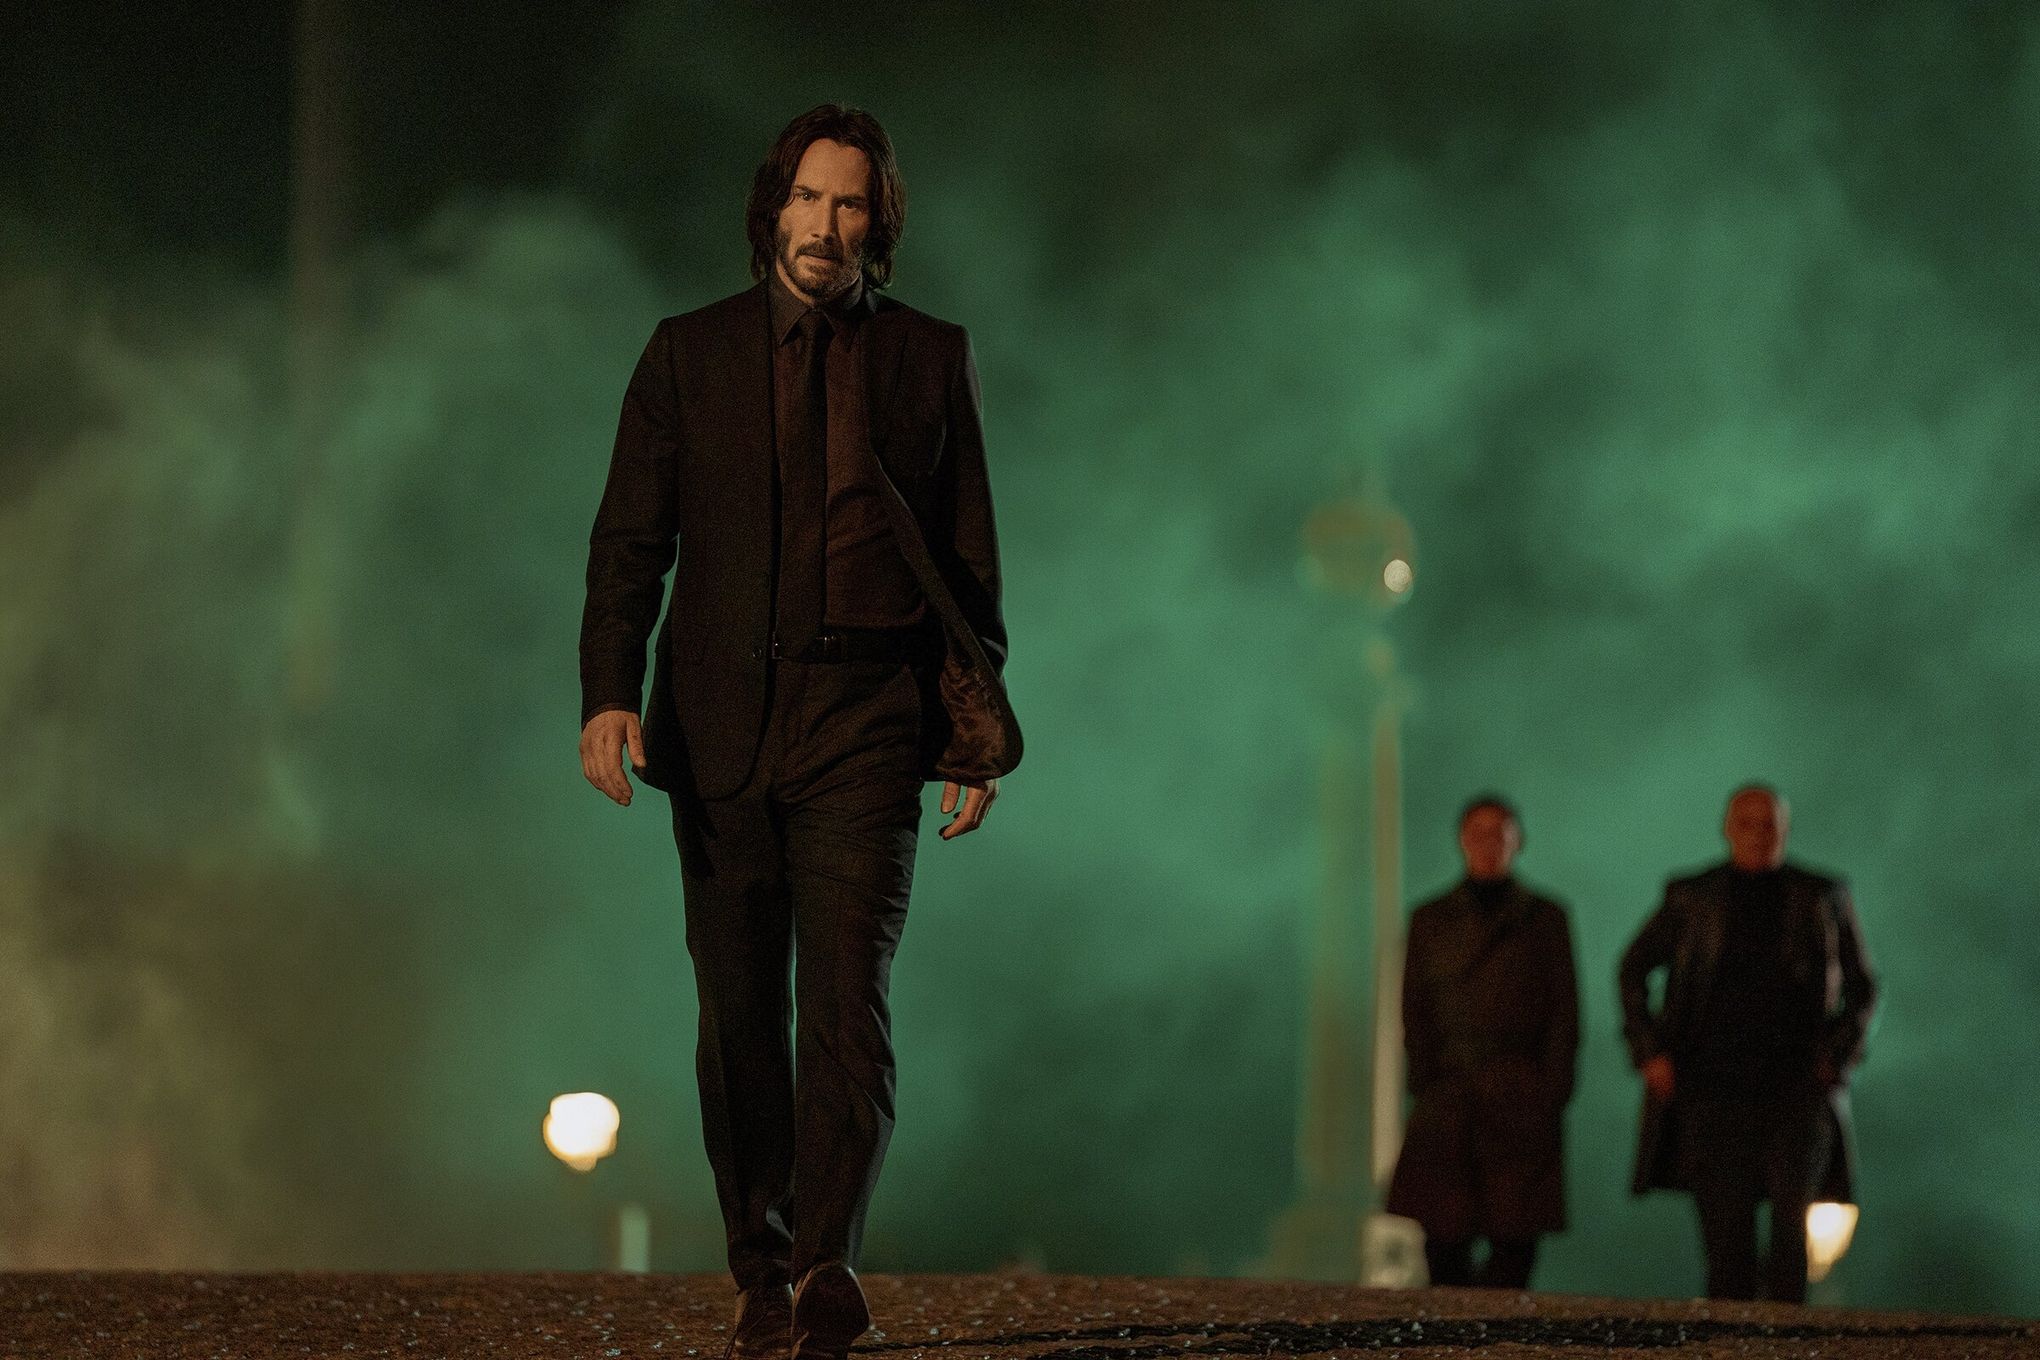 Autopsy Of A Scene — John Wick. Exploration of the artistic